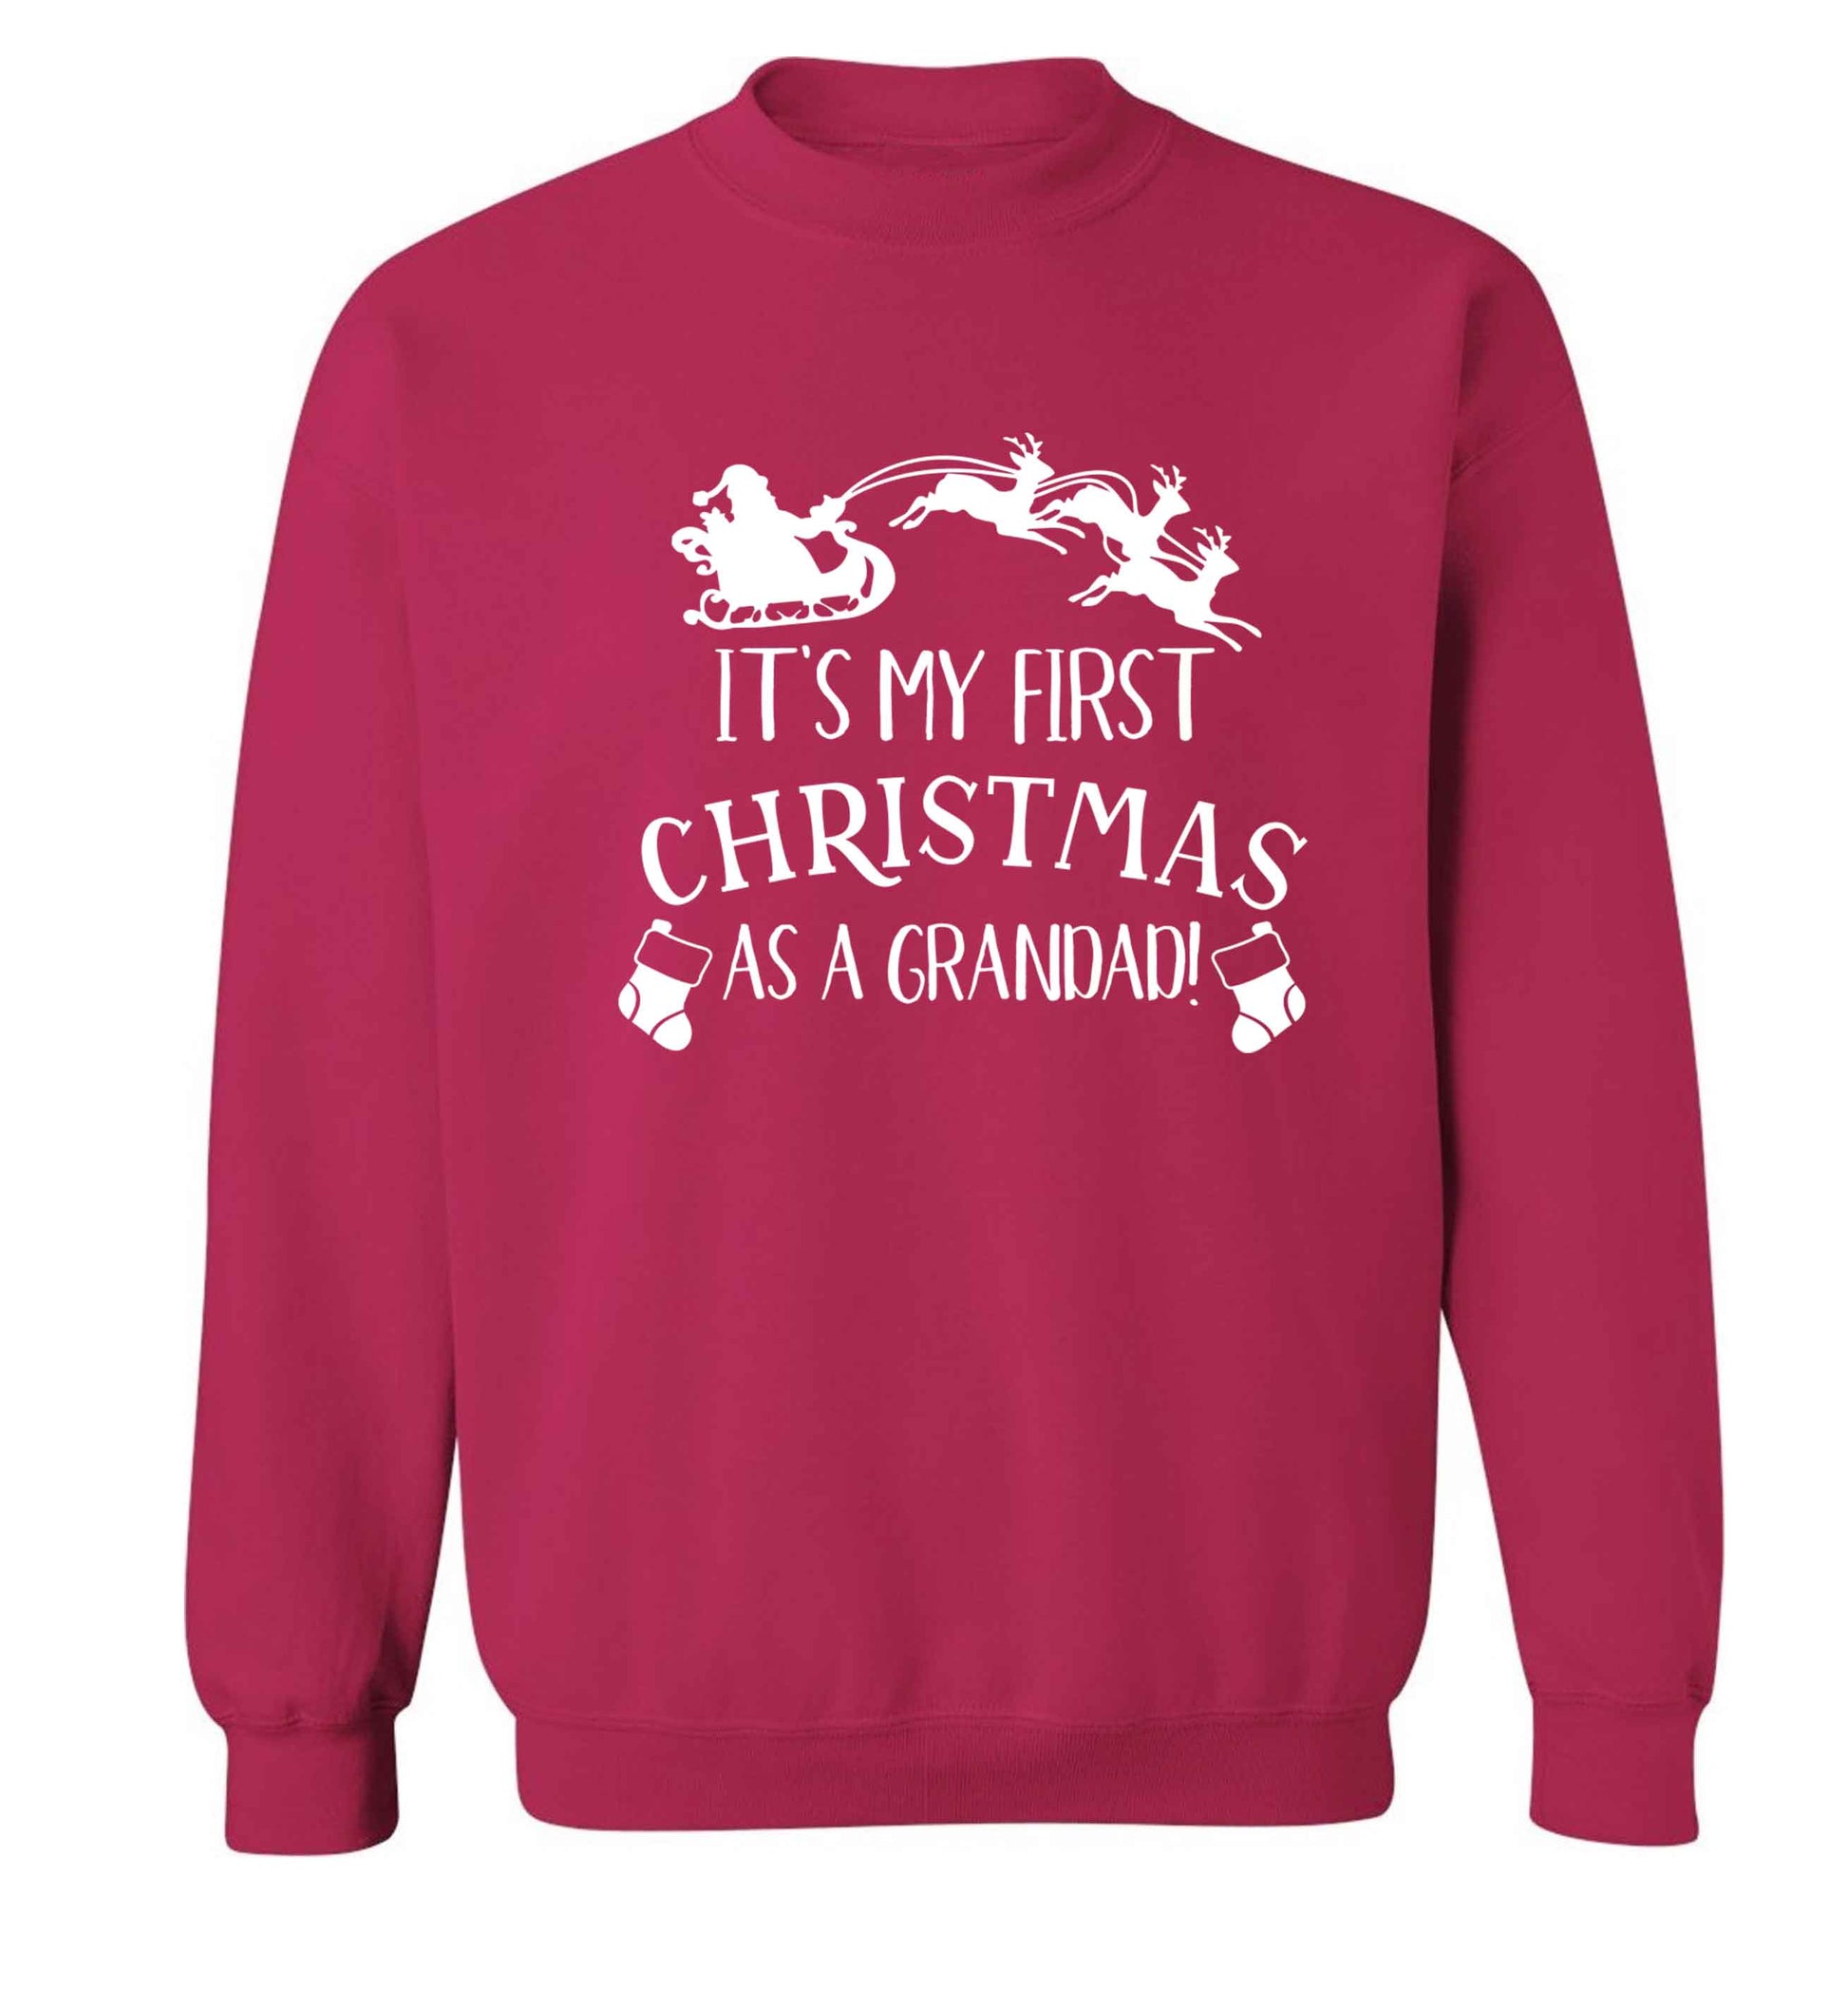 It's my first Christmas as a grandad! Adult's unisex pink Sweater 2XL